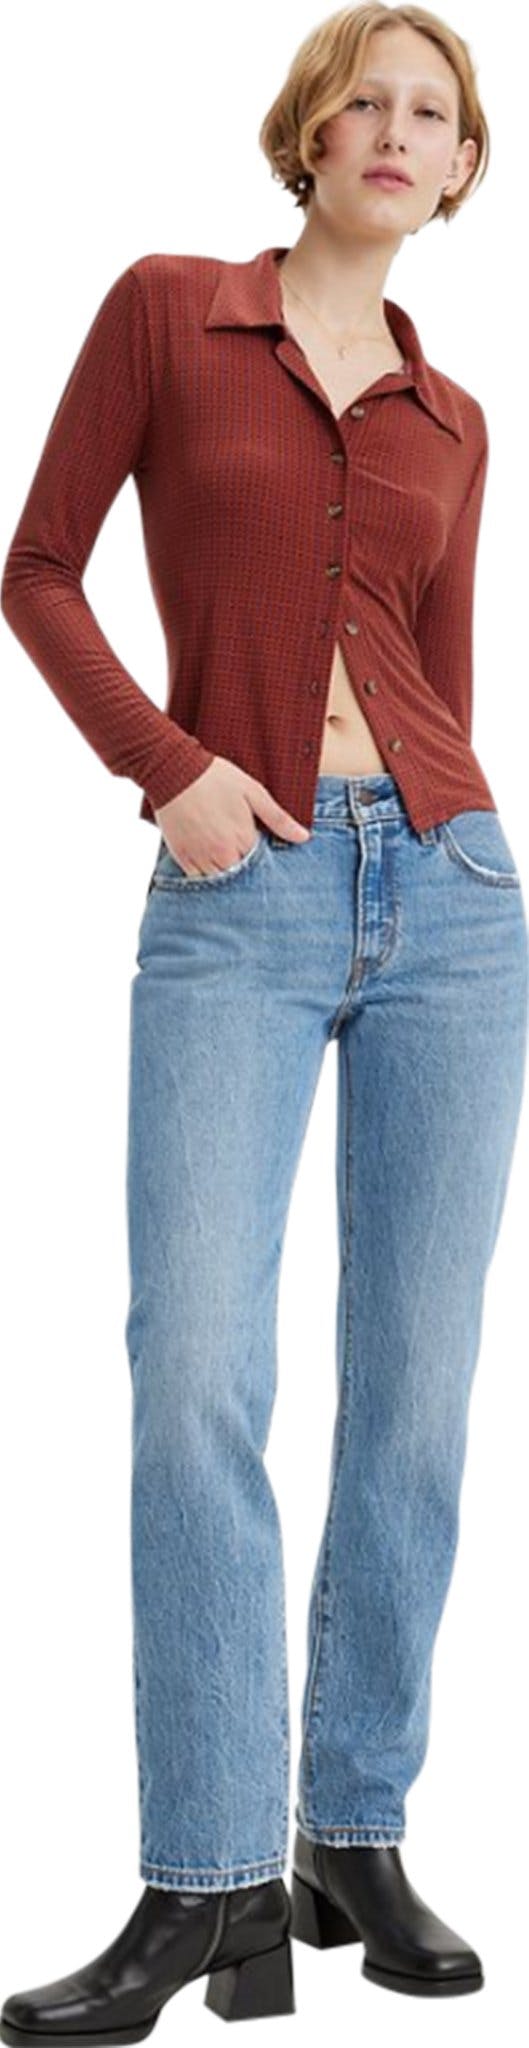 Product image for Middy Straight Leg Jeans - Women's